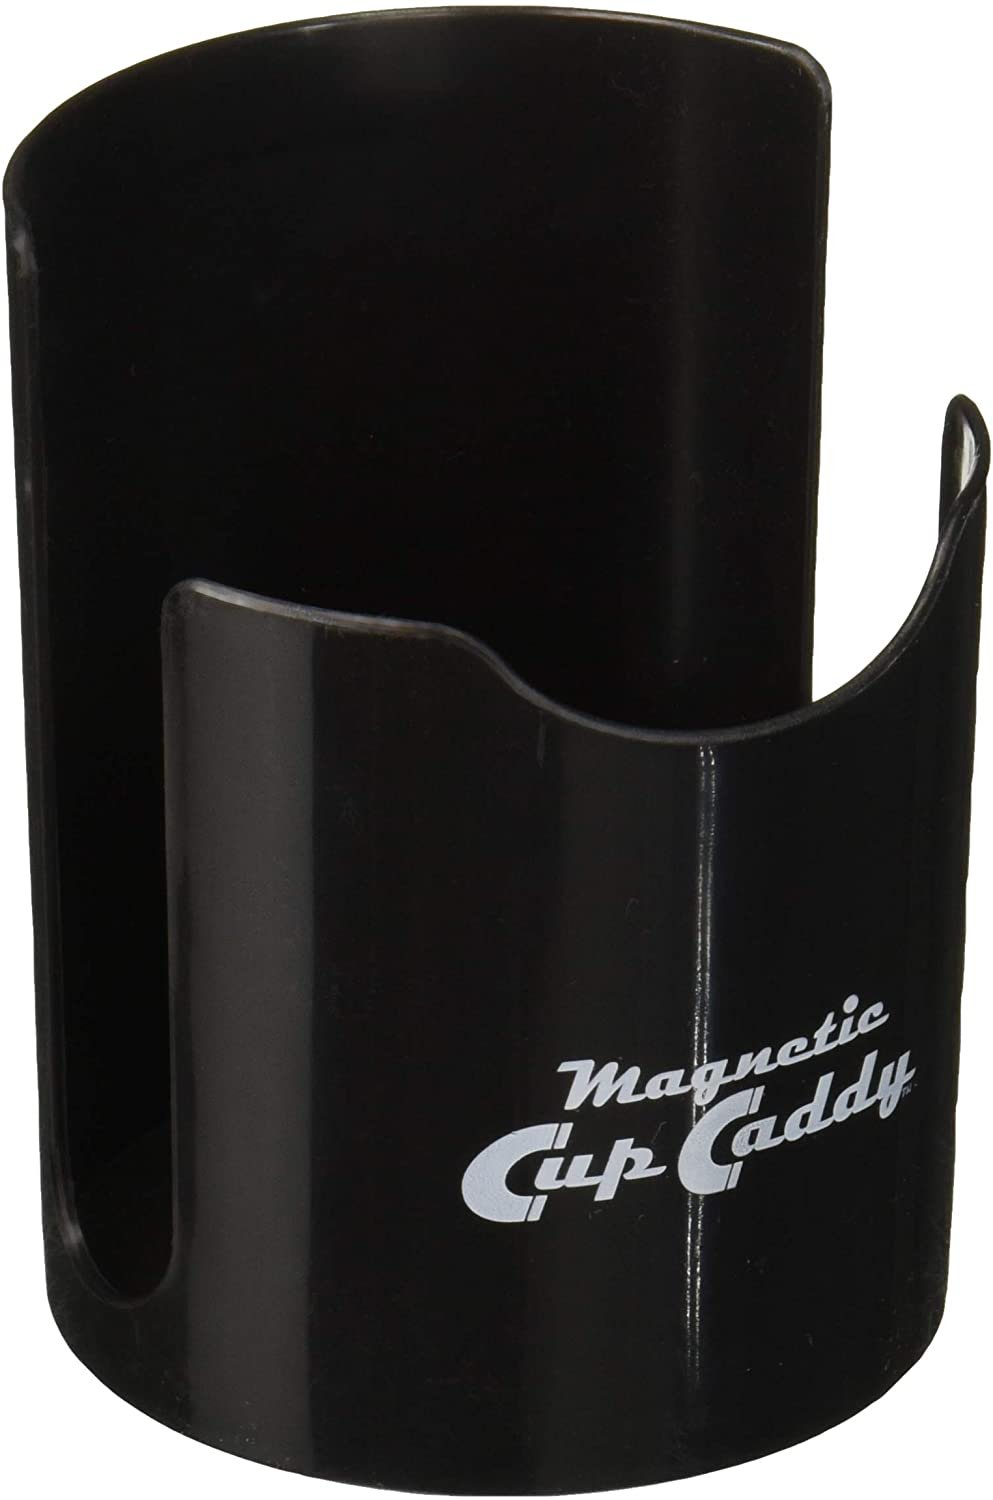 Master Magnetics 7583 Magnetic Cup Caddy Holder